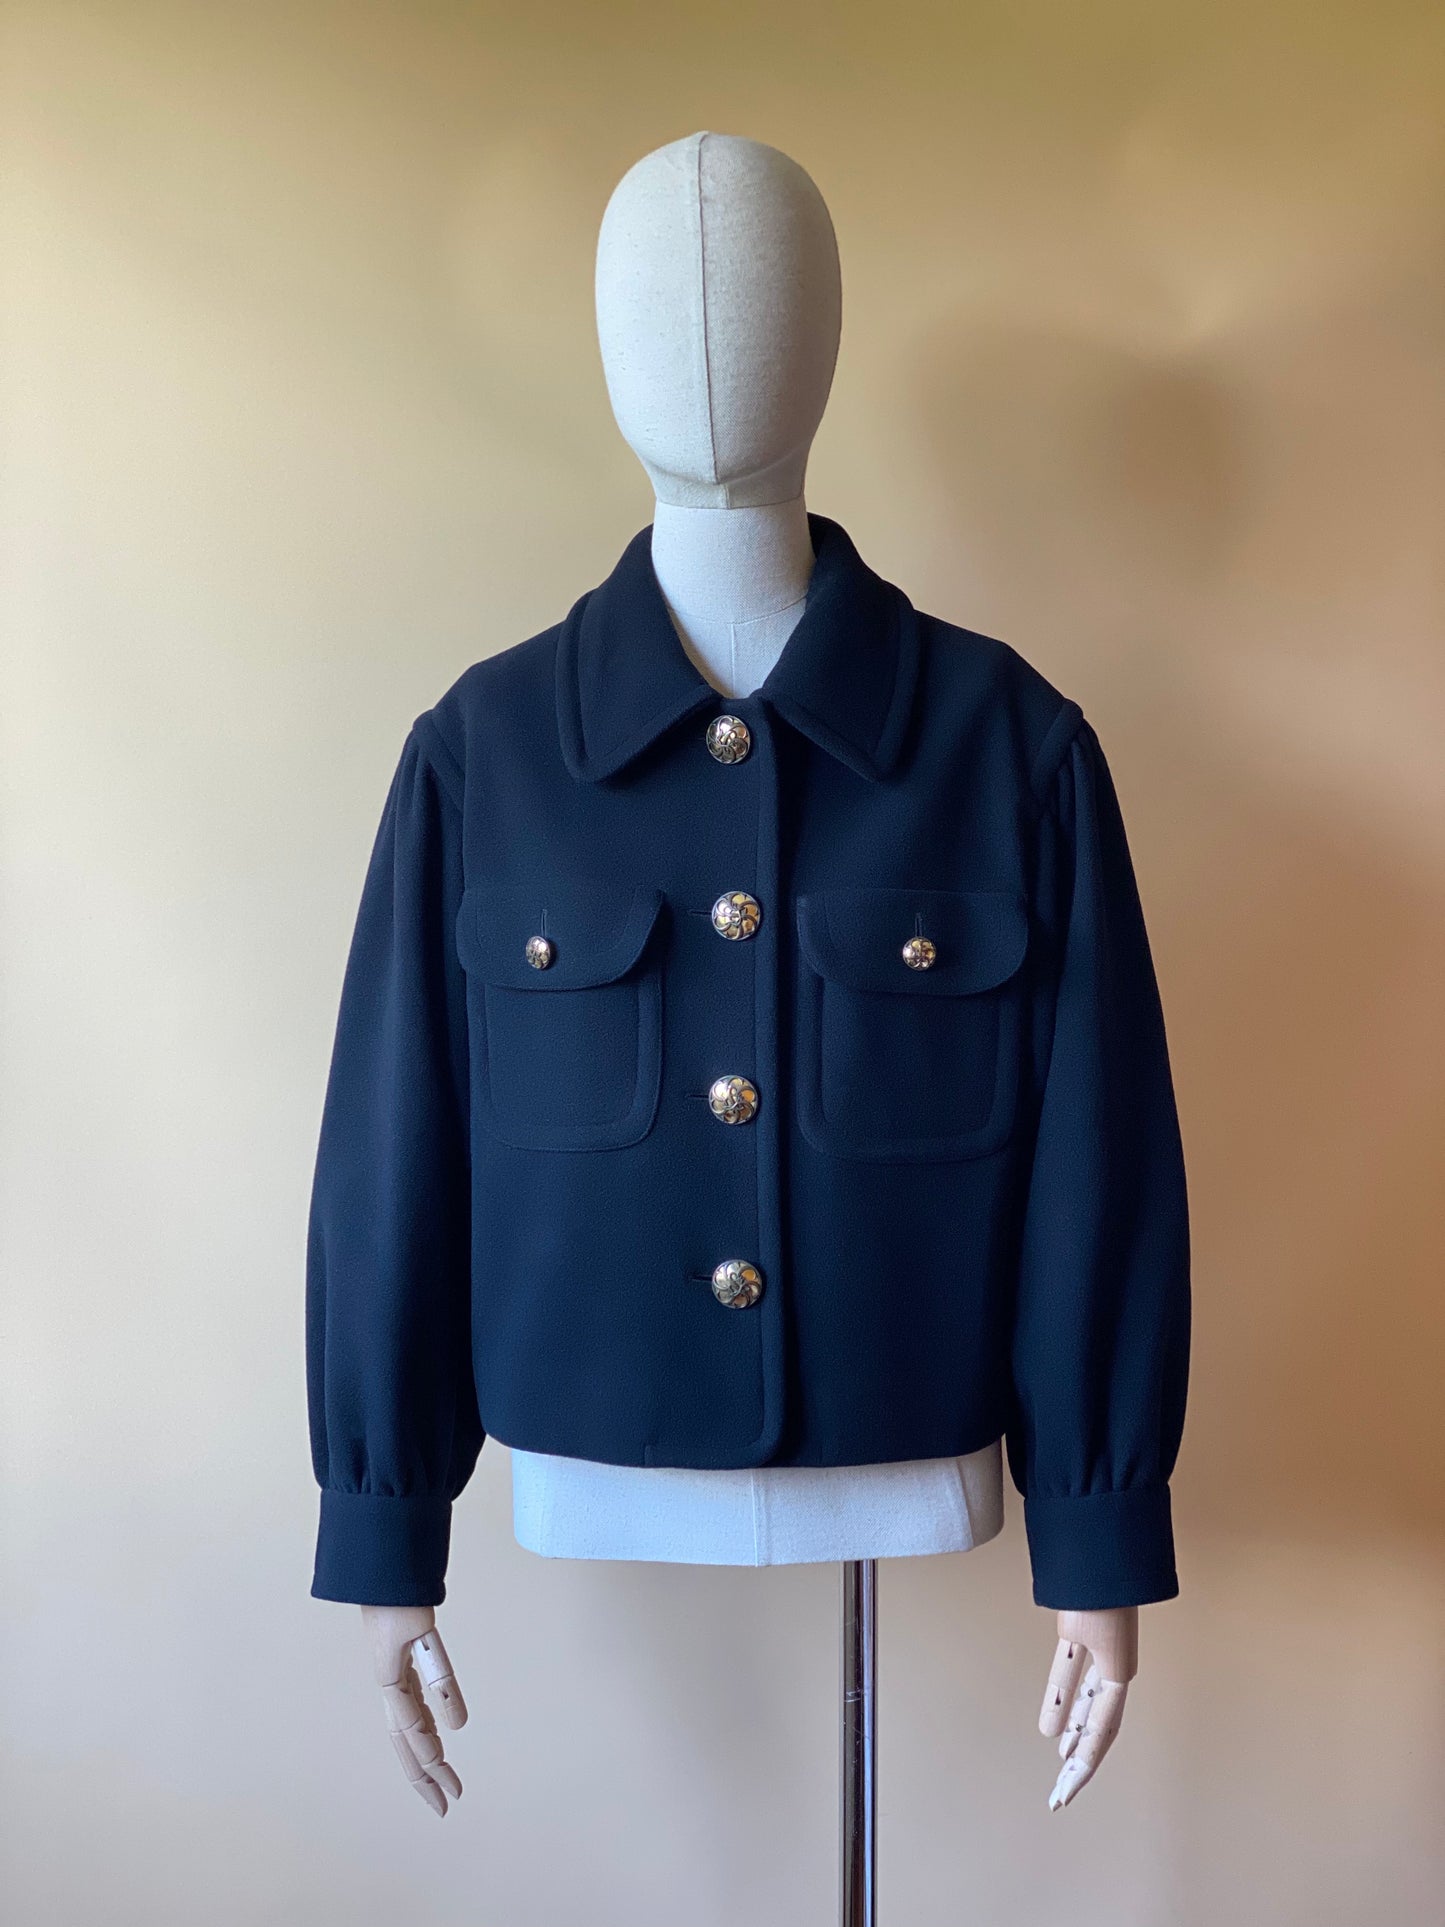 Vintage Moschino Cheap & Chic Wool & Mohair Jacket